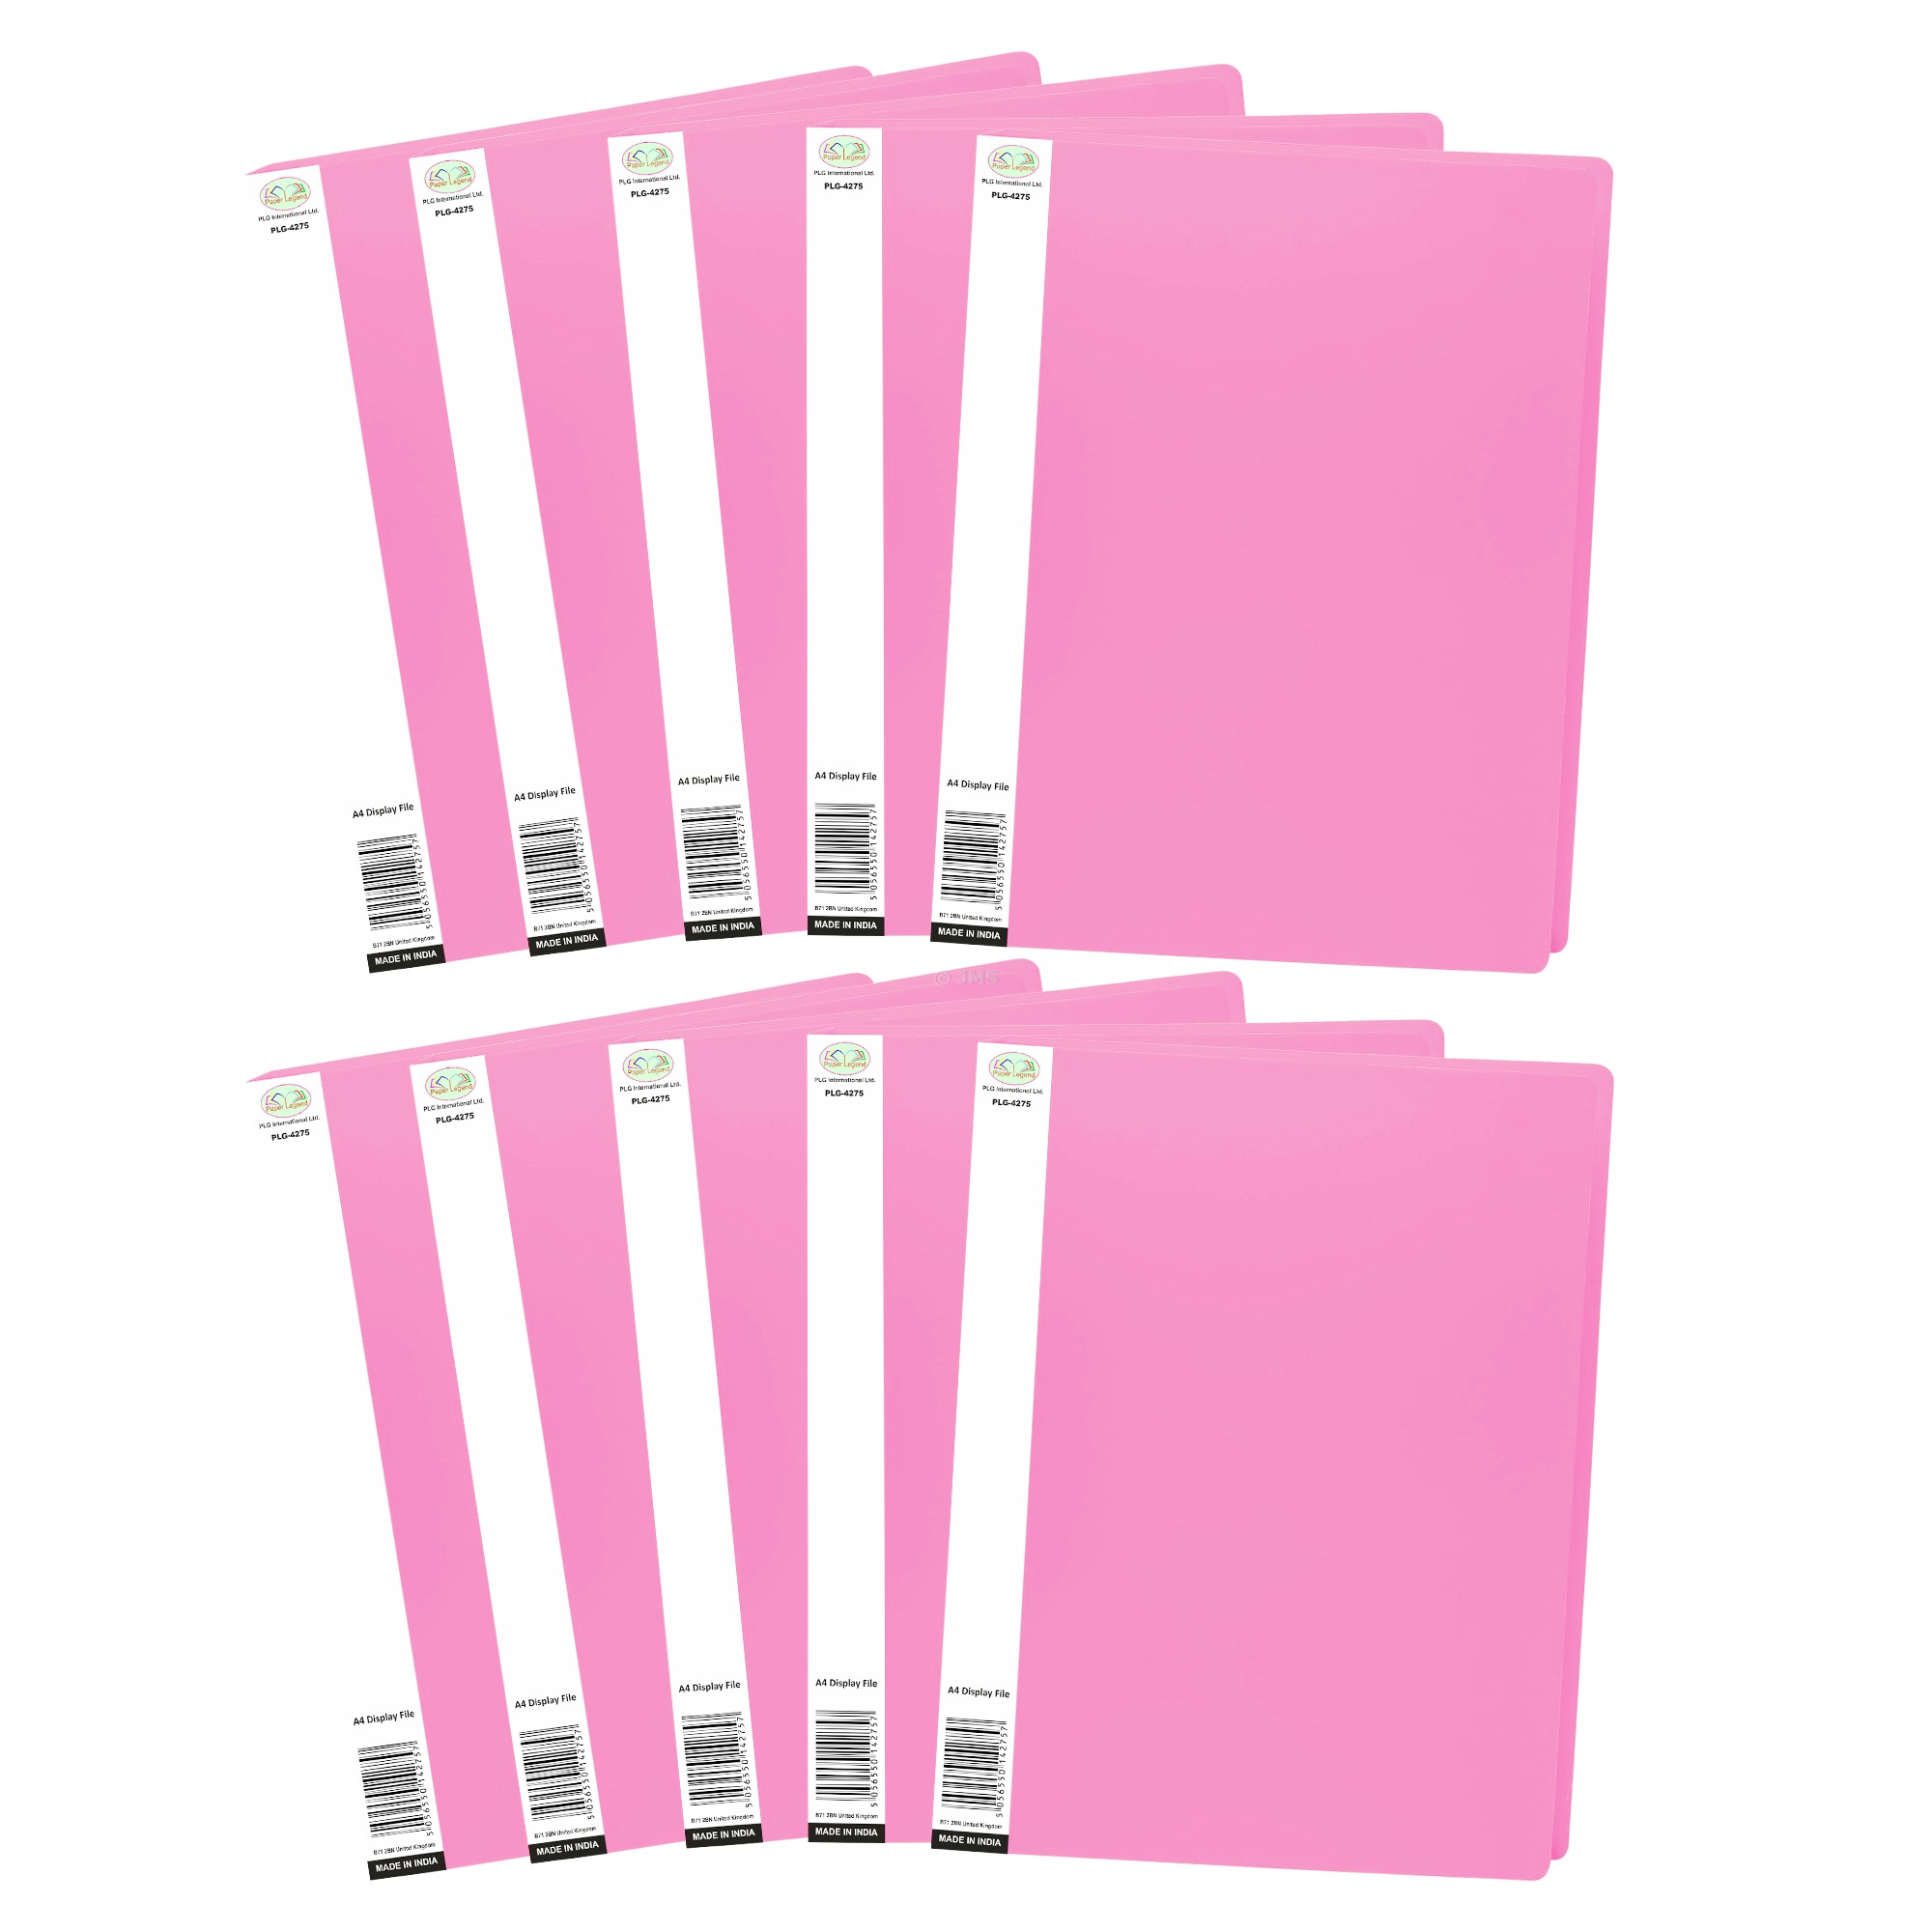 (Pack of 10) A4 Display Folders Pink Portfolio Project Display Book Plastic Sleeves 20 Pockets 40 View Page Poly Presentation Folder for Portfolios, Certificate, Document, Paperwork Organiser Holder Case